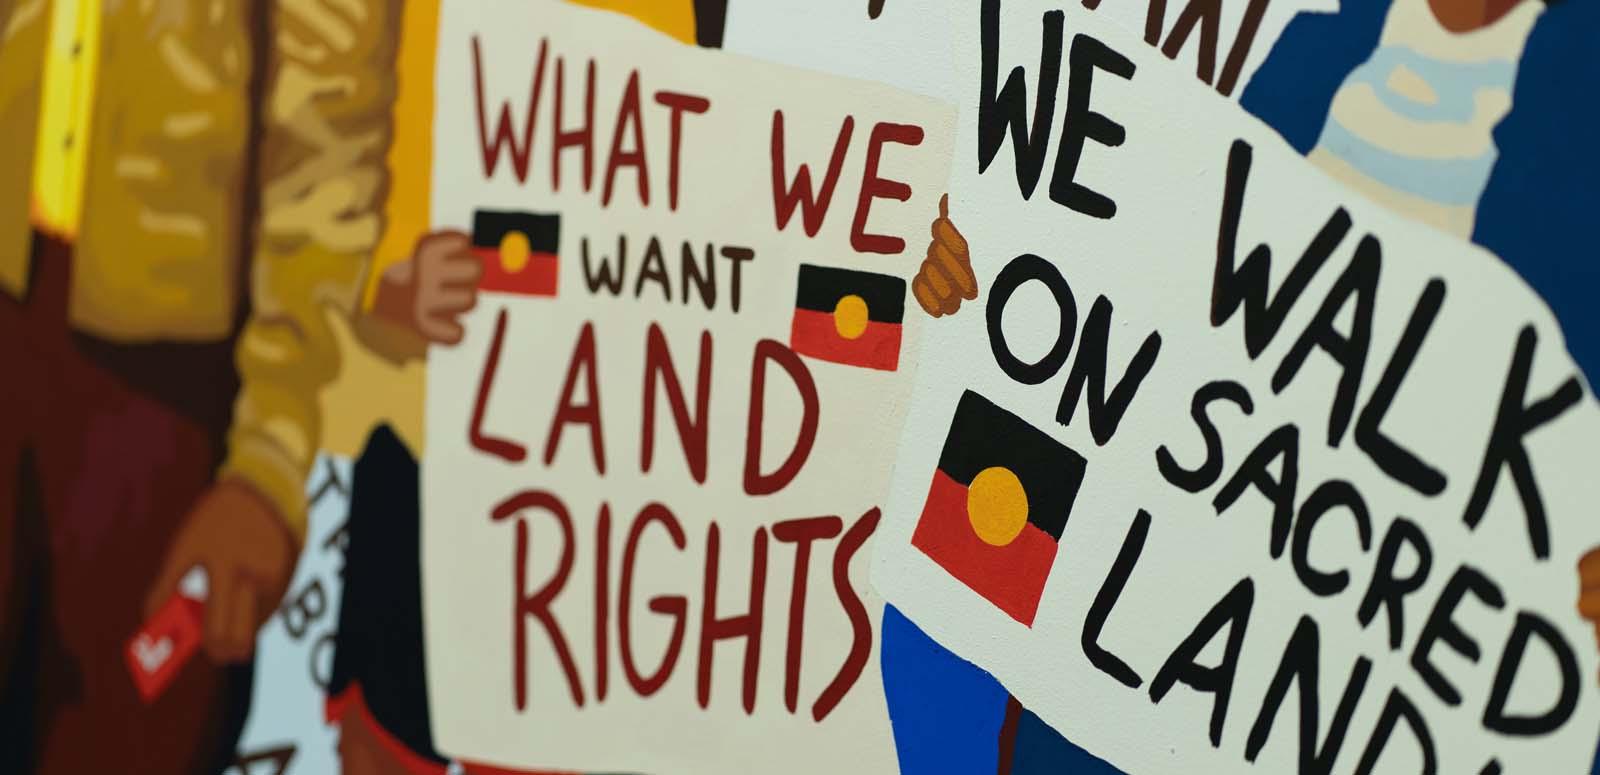 Protesters hold banners calling for Aboriginal land rights at a march